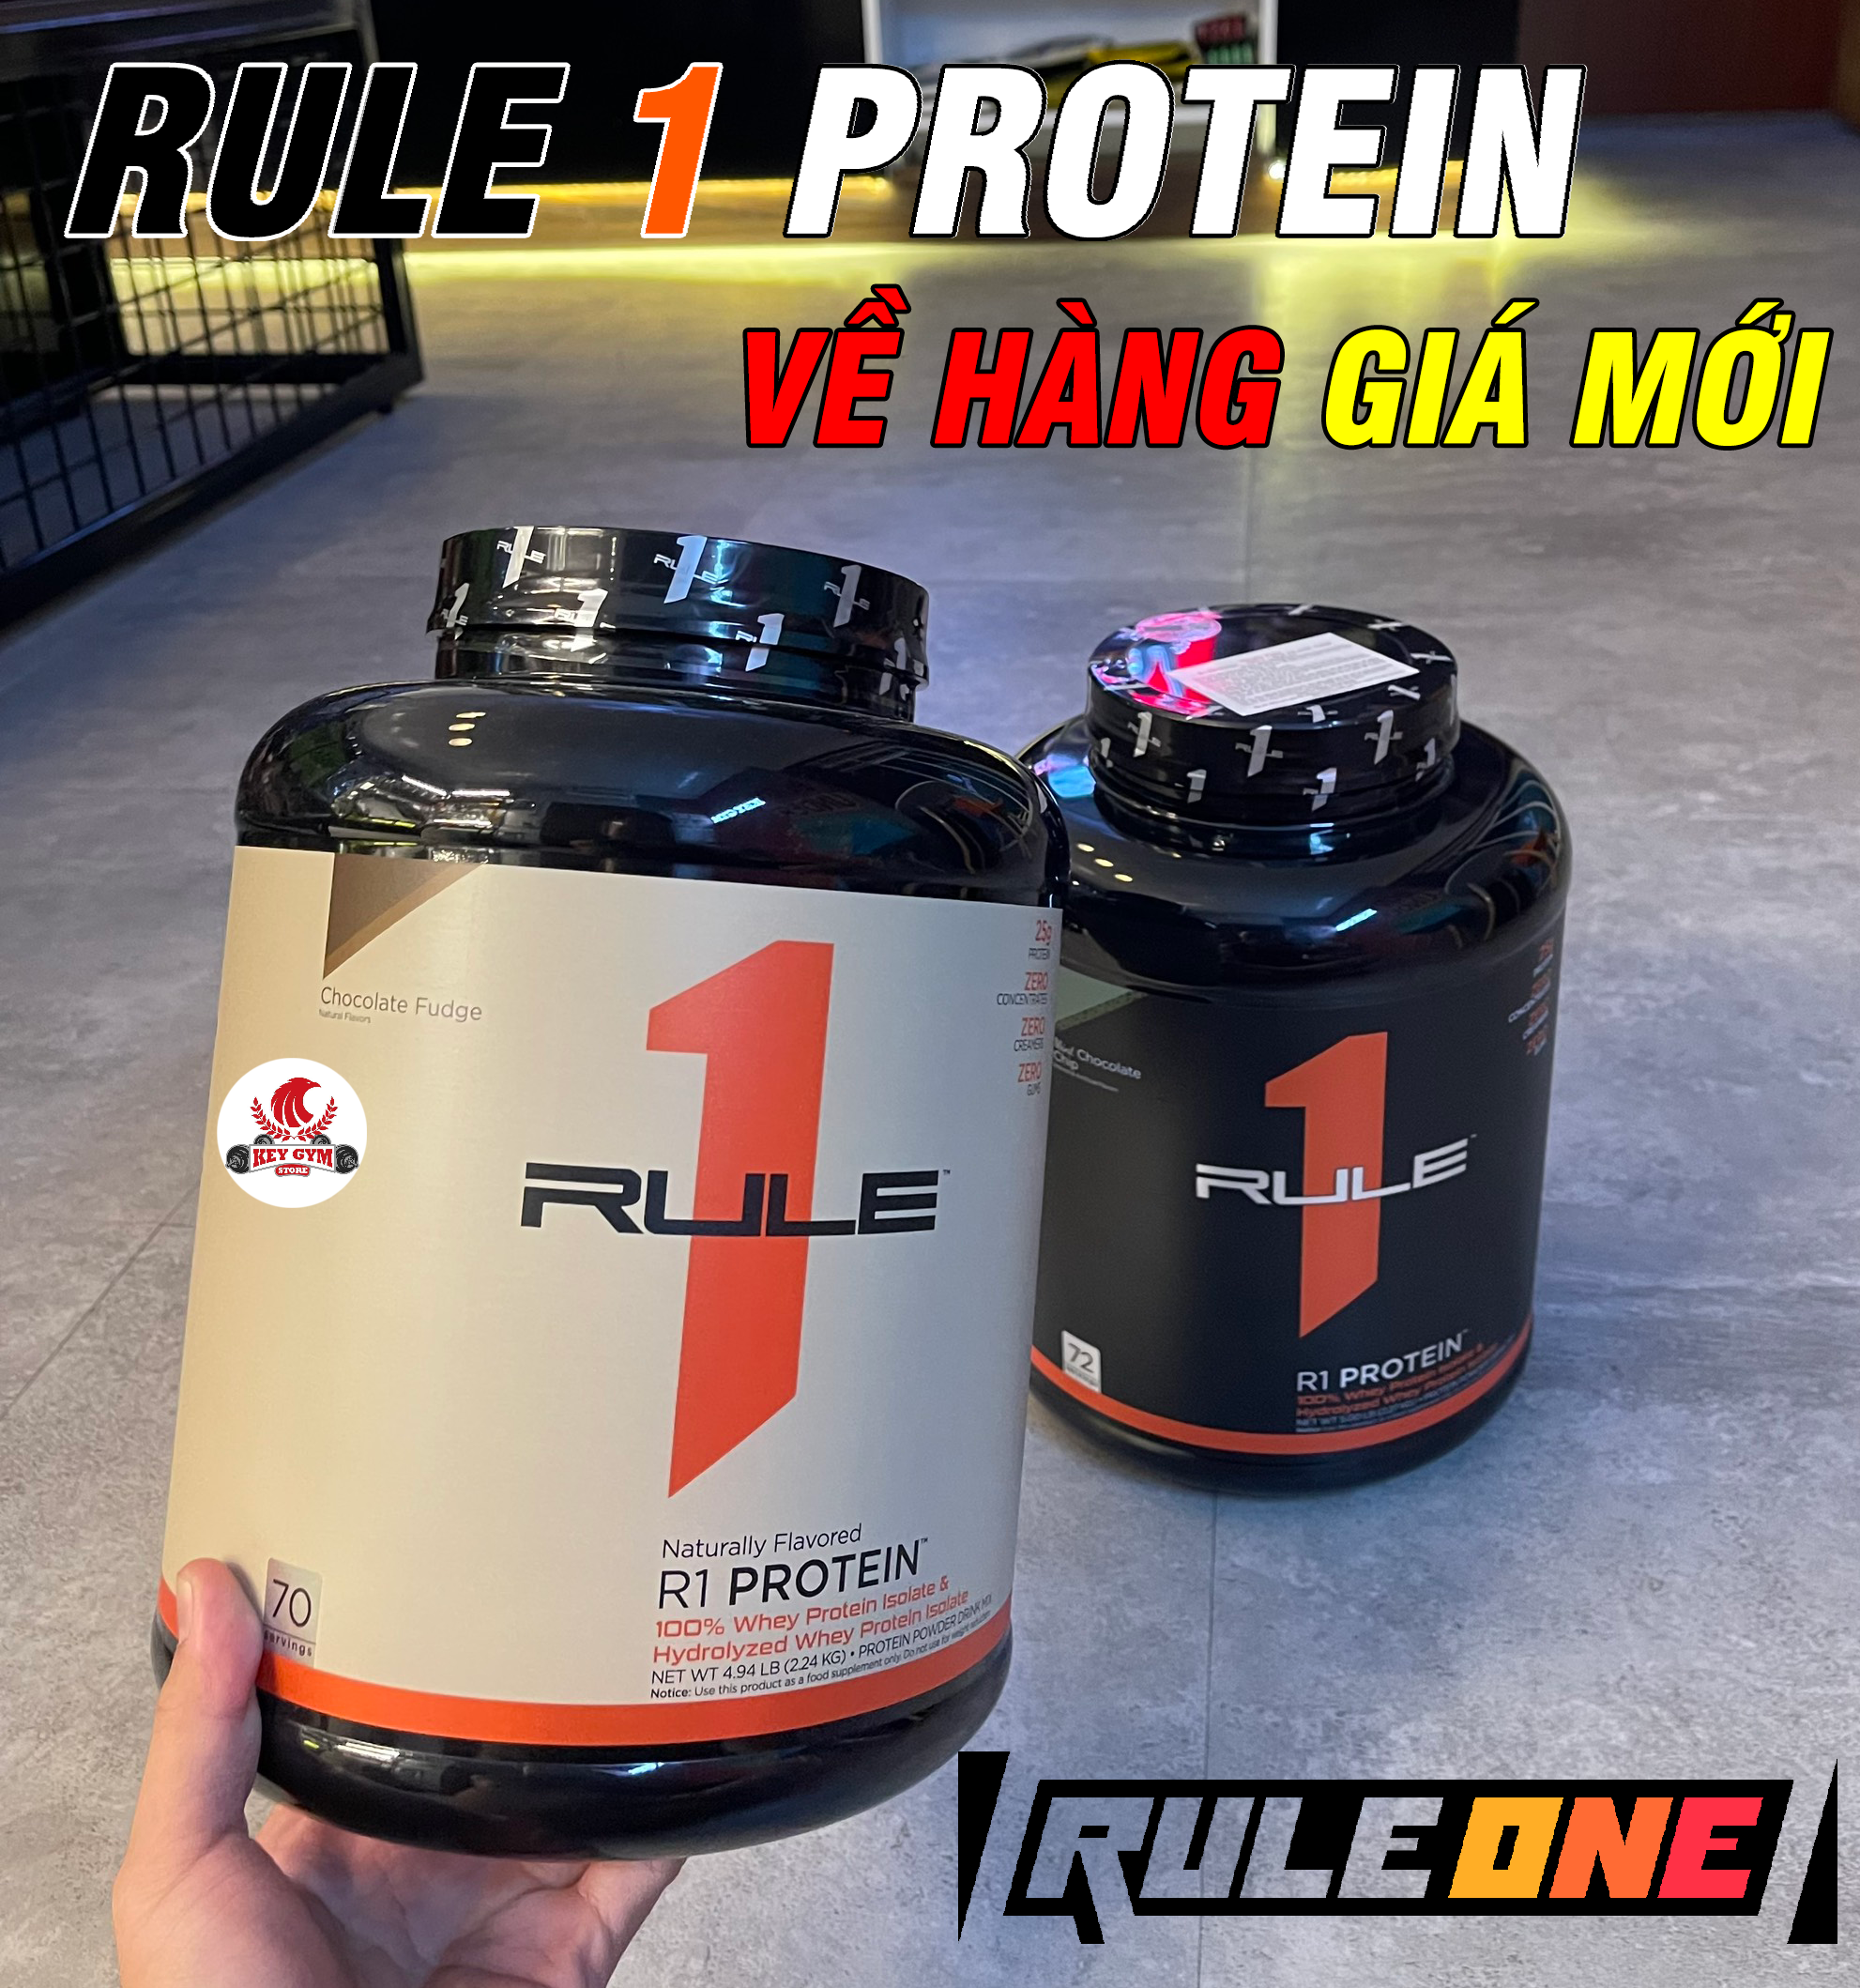 R1 Protein Naturally Flavored